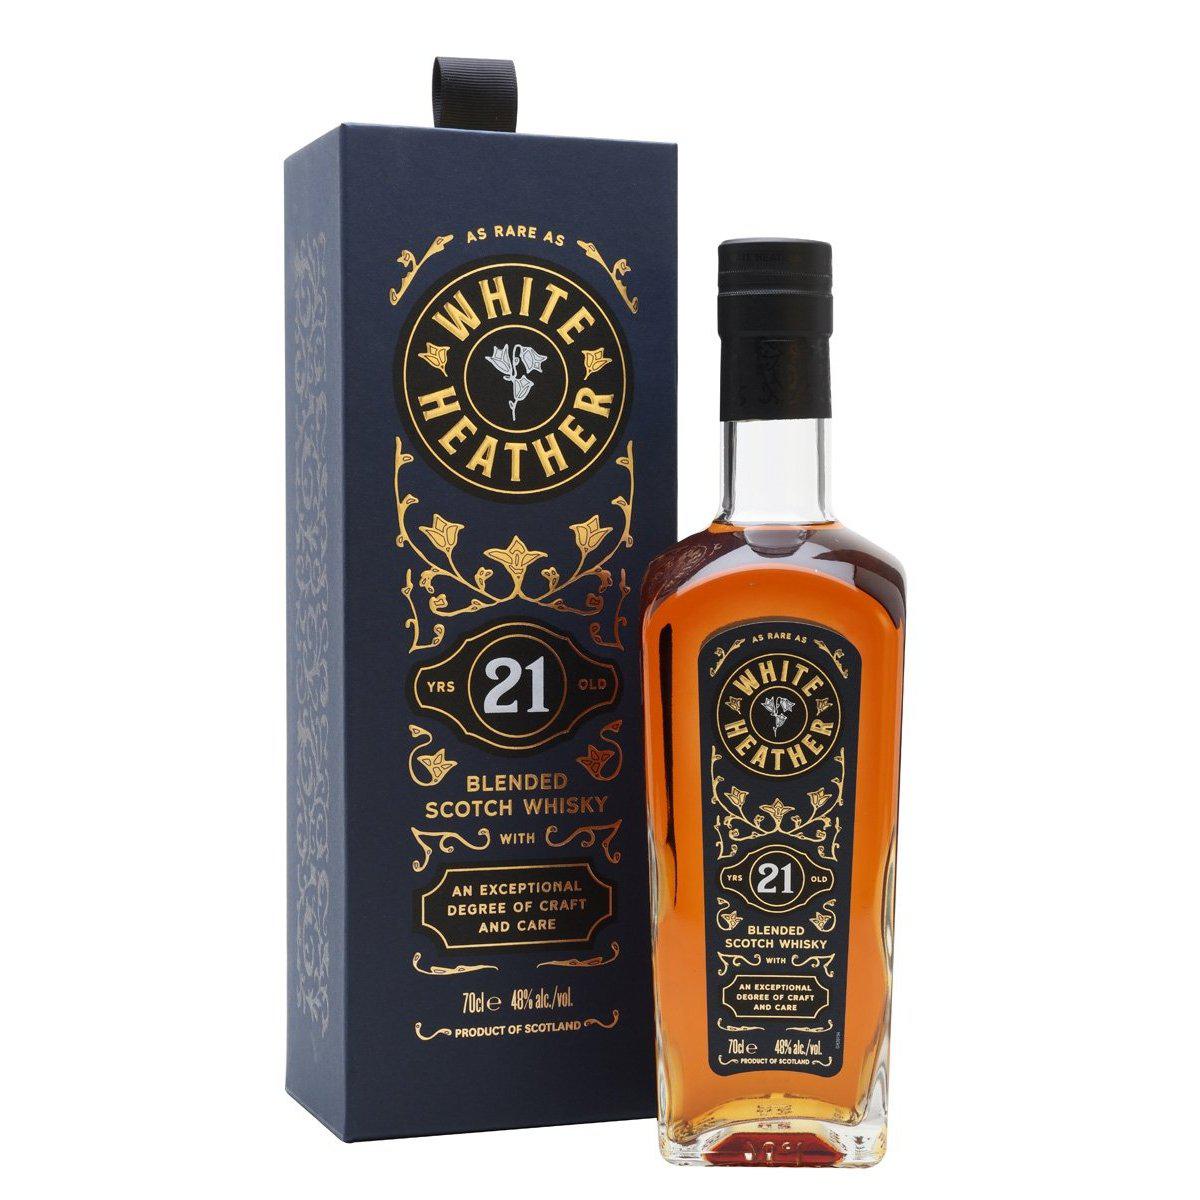 White Heather 21 Year Old Blended Scotch Whisky 700ml